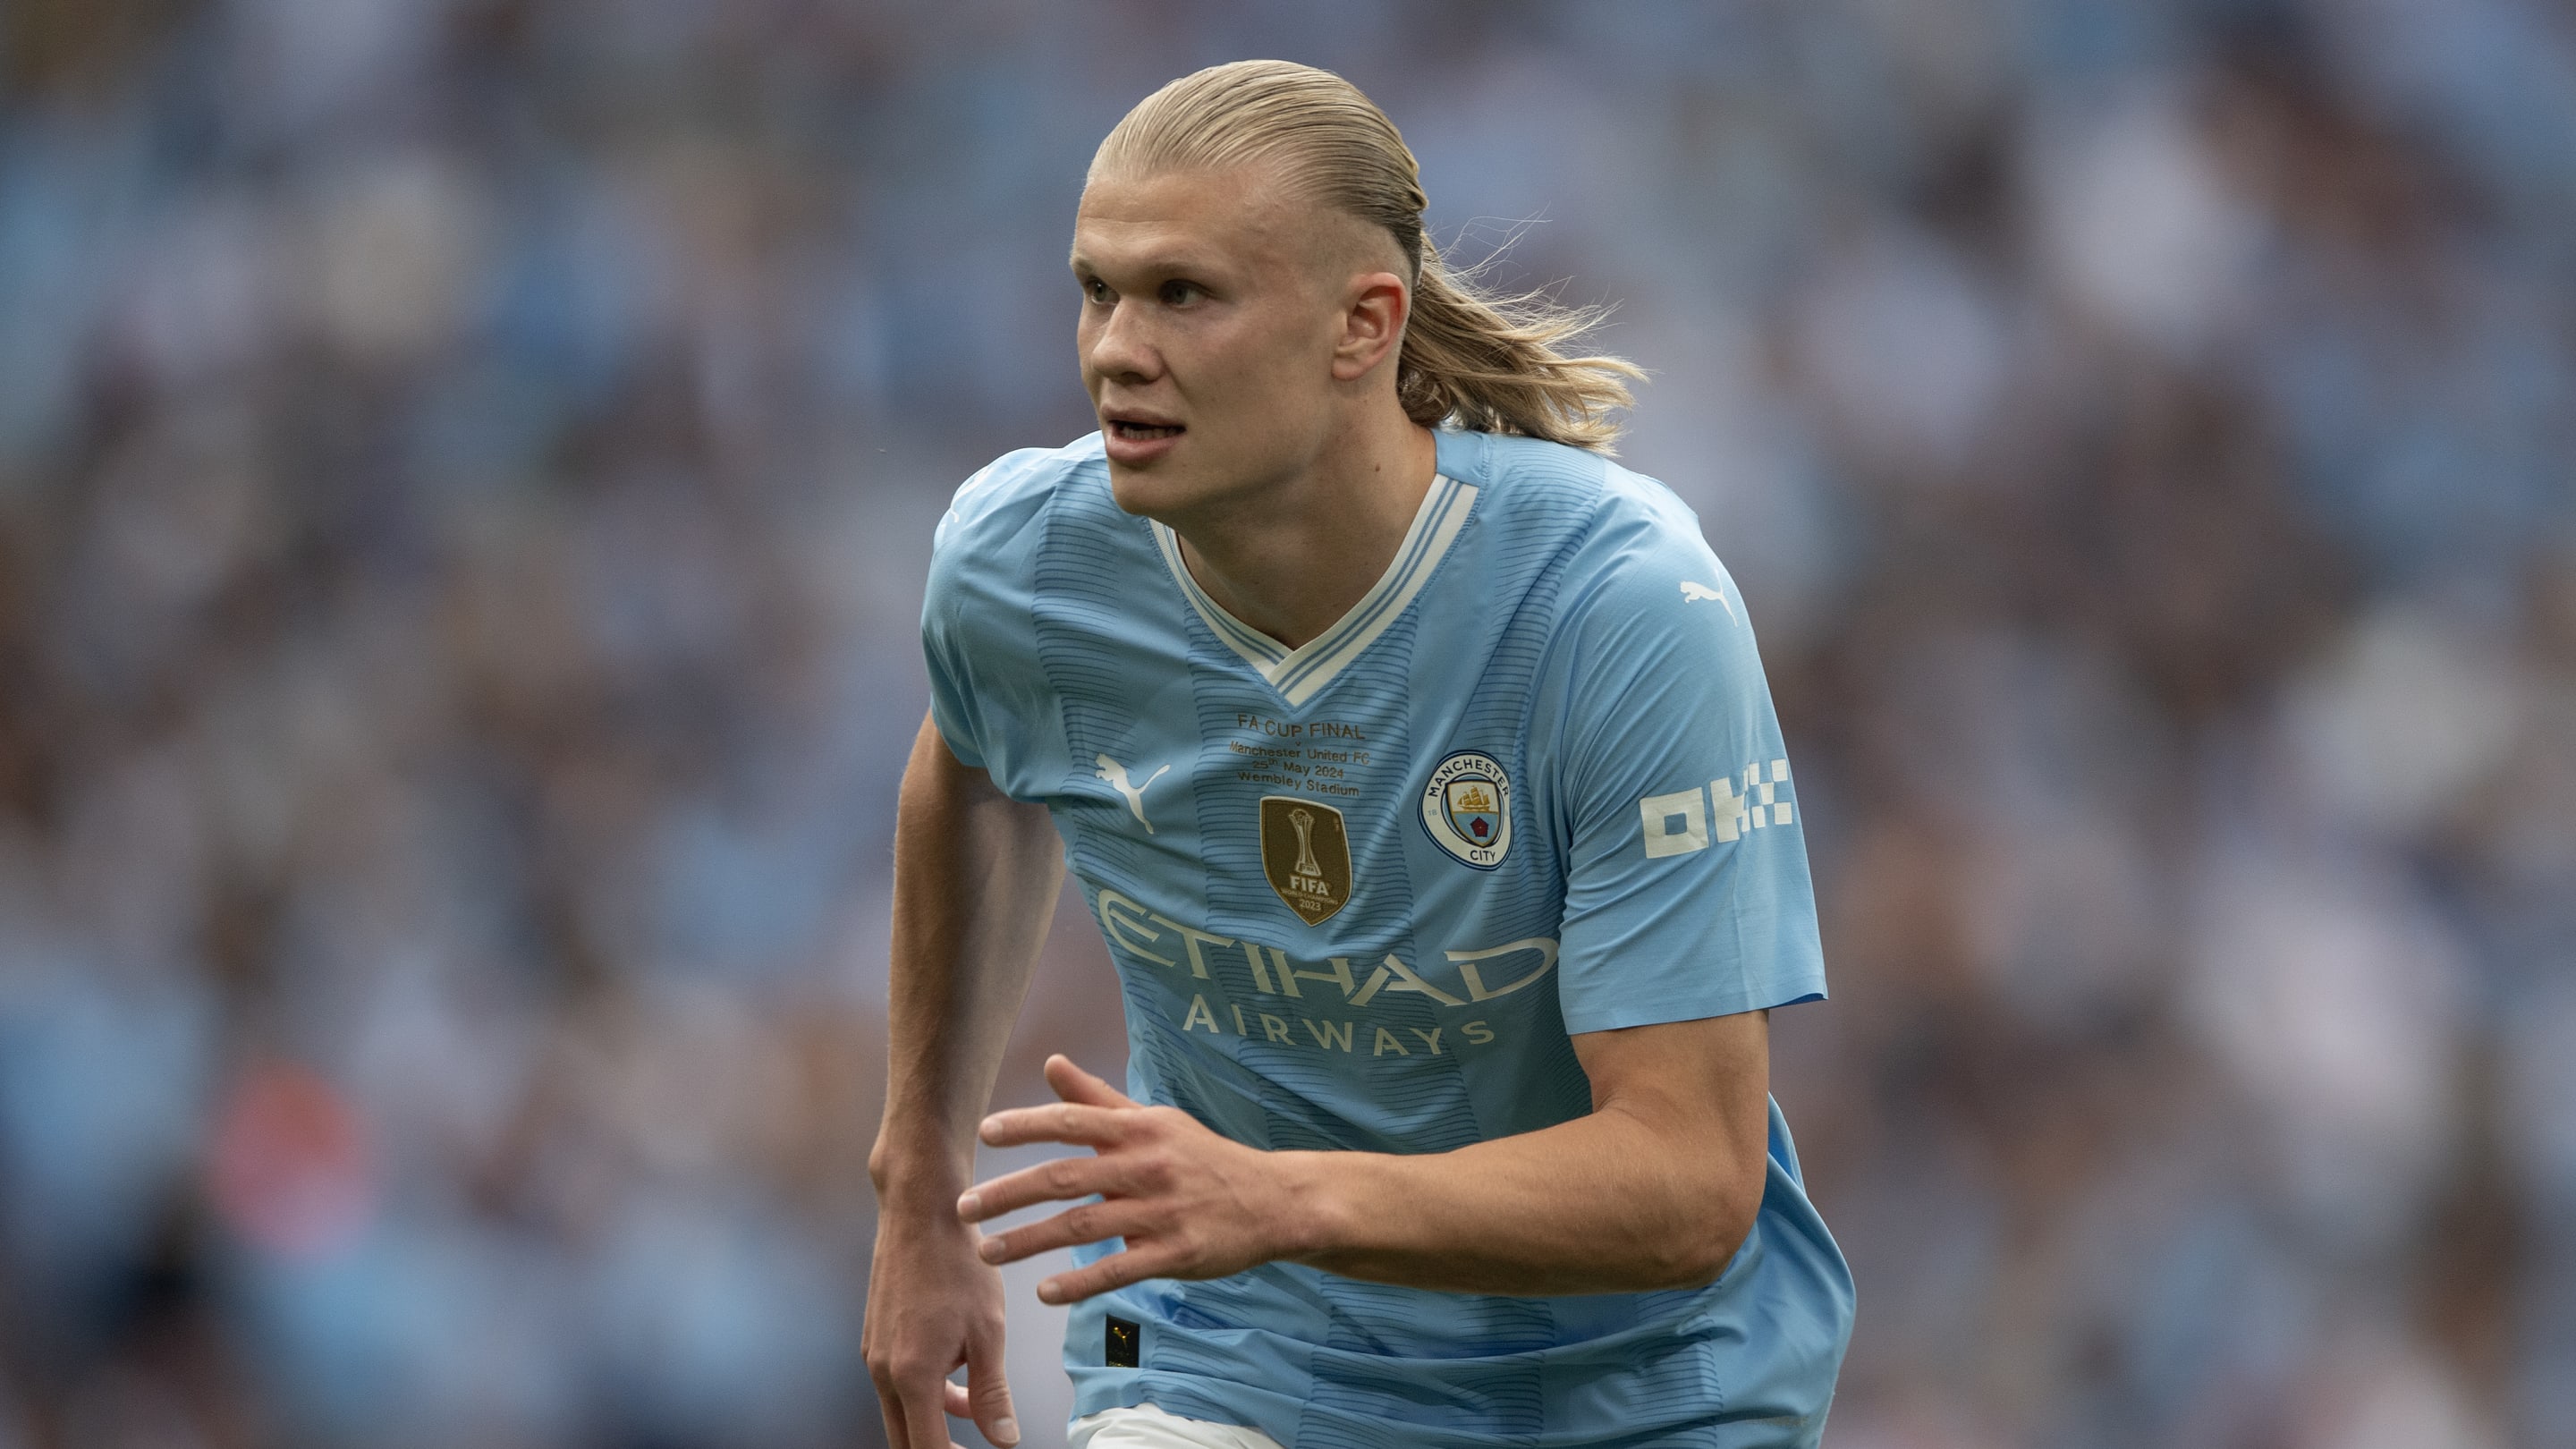 Erling Haaland shuts down question about Man City contract